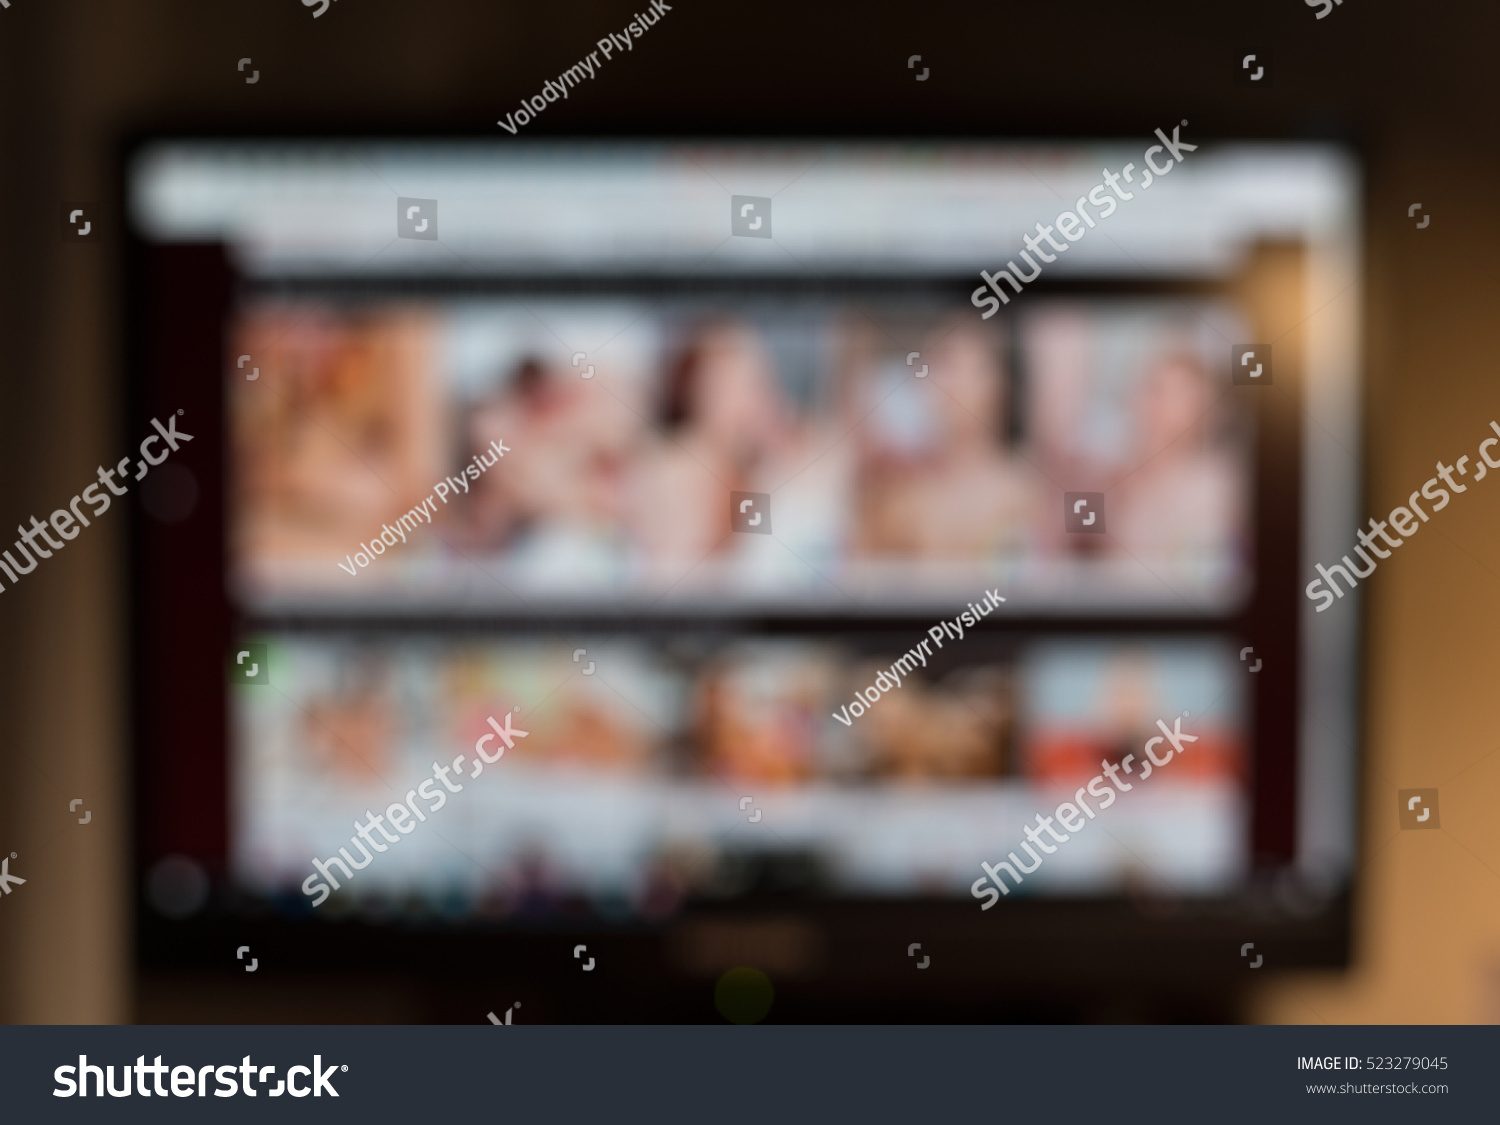 Stock Photo Porn Site Adult Content Only Online Porn Concept Sex And Sites Porn Site Theme Creative 3